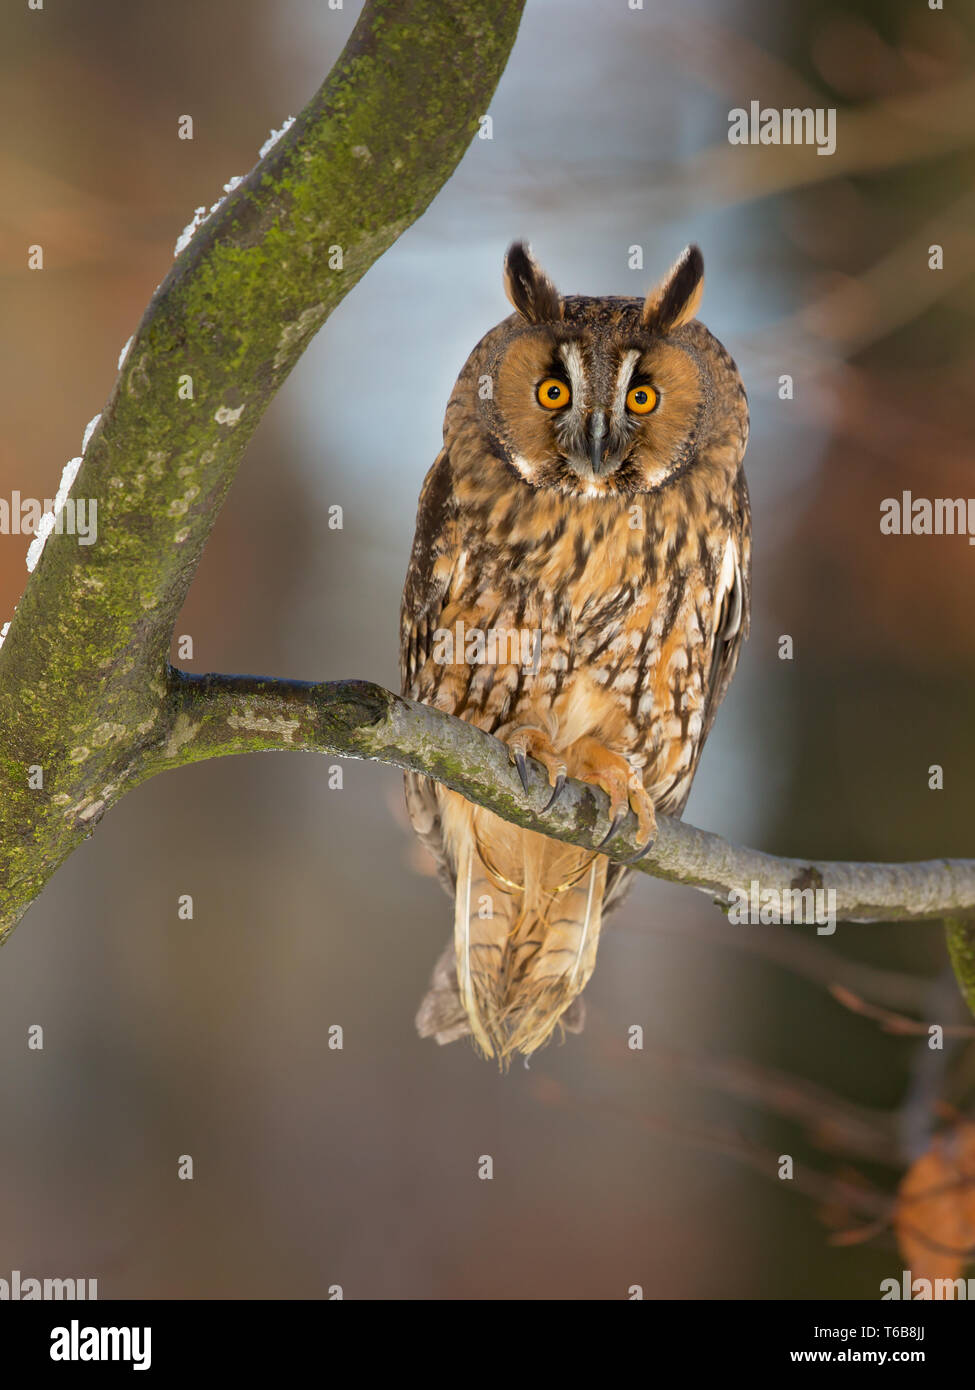 Long-eared owl (Asio otus), also known as the northern long-eared owl, is a species of owl which breeds in Europe, Asia, and North America. Stock Photo